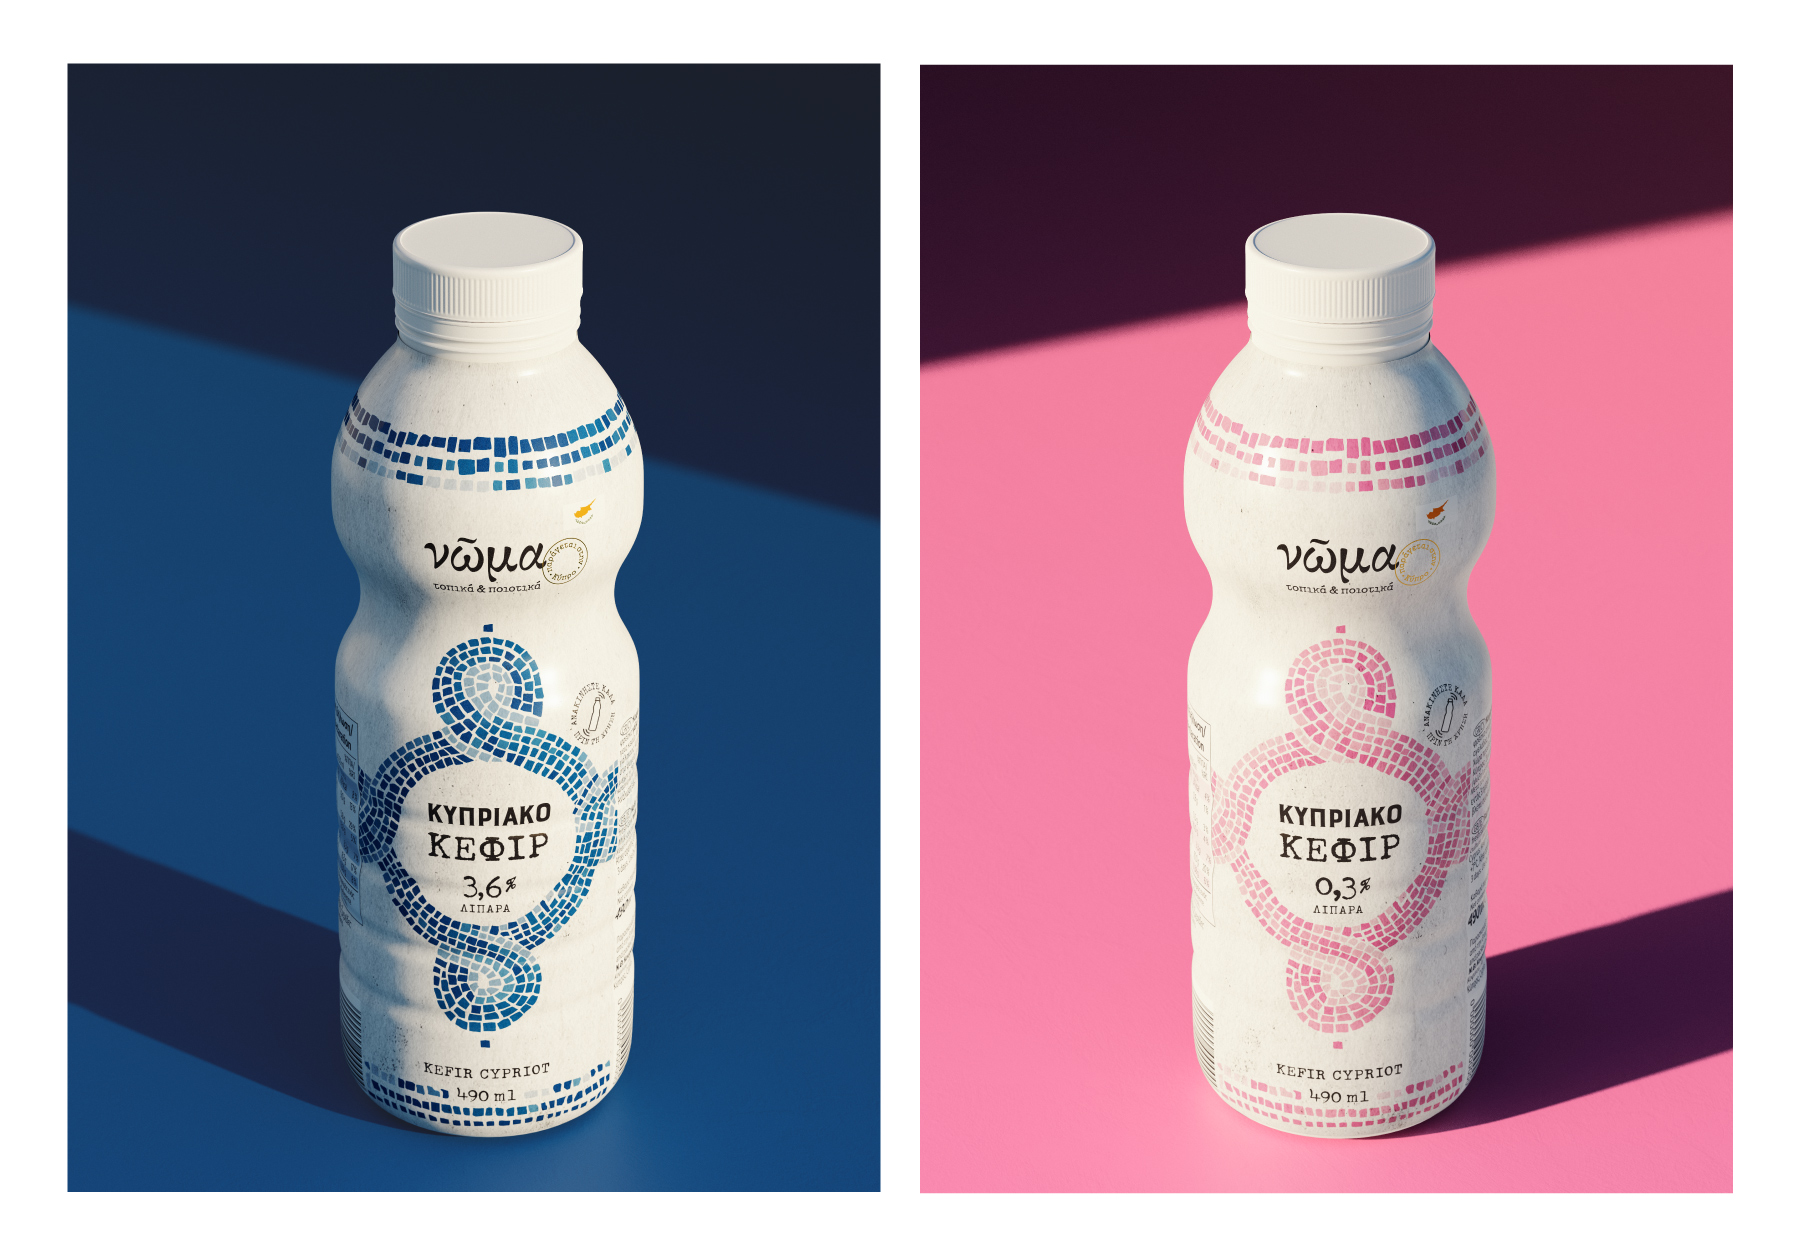 Lidl's Noma Kefir: A Modern Take on a Traditional Dairy Product with a Unique Packaging Design